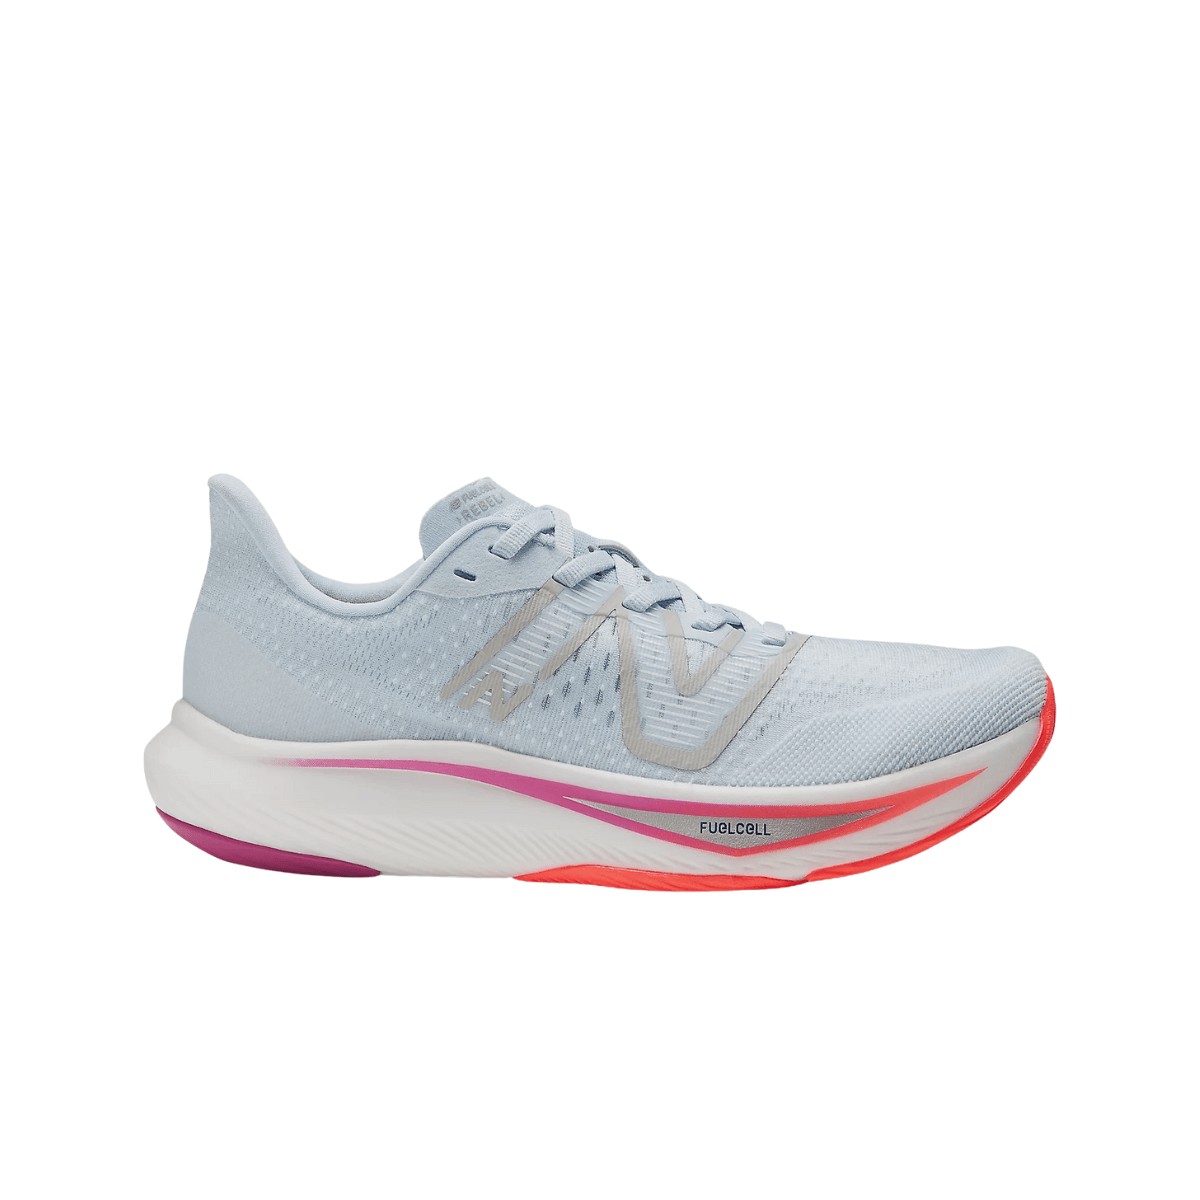 Chaussures New Balance FuelCell Rebel v3 Bleu Clair Rouge AW22 Femme, Taille 37,5 - EUR